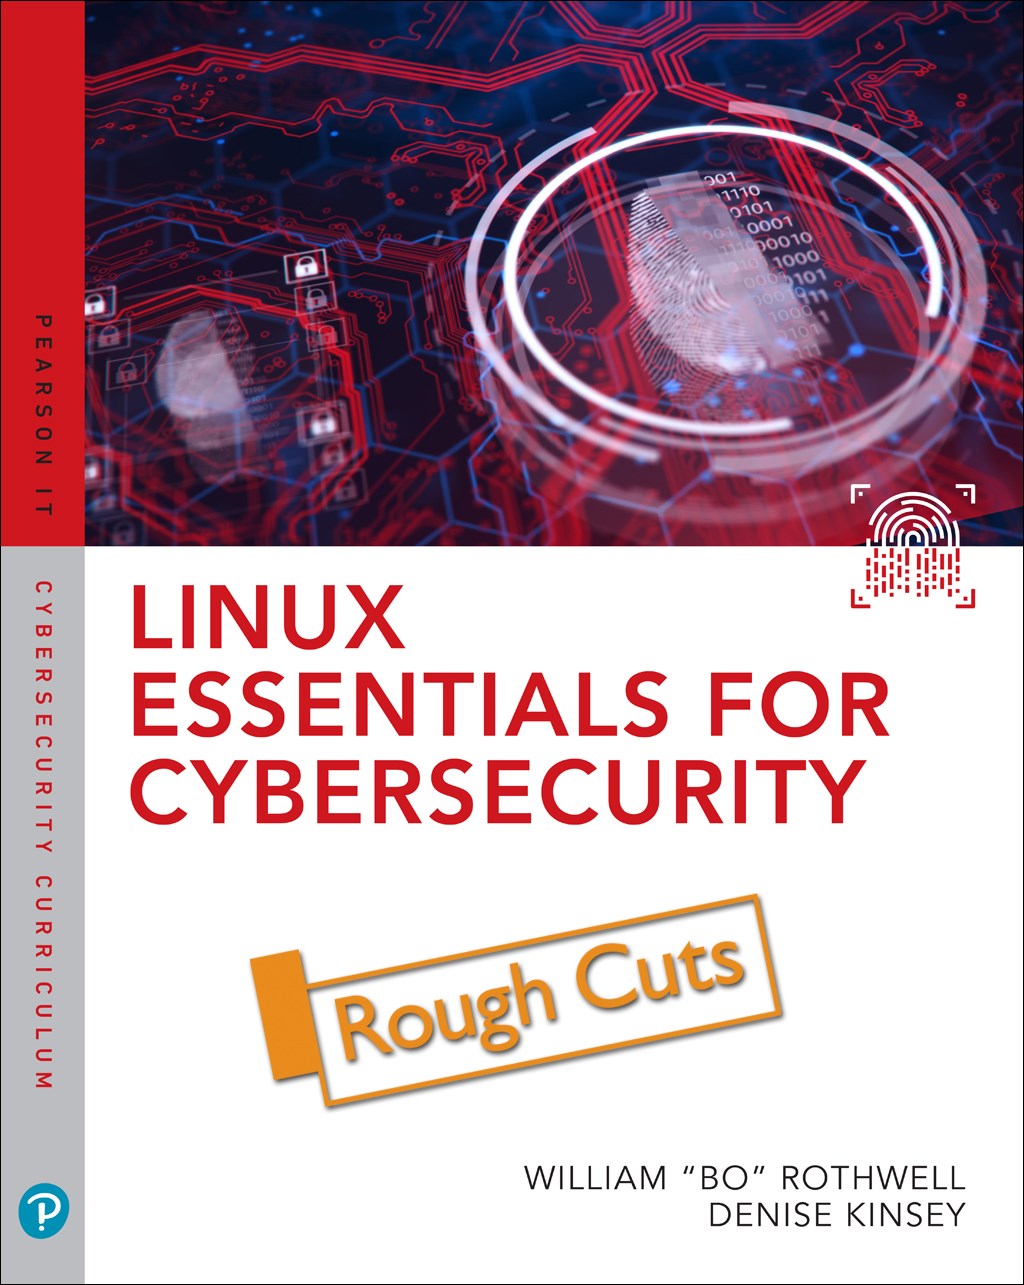 Linux Essentials for Cybersecurity,Rough Cuts